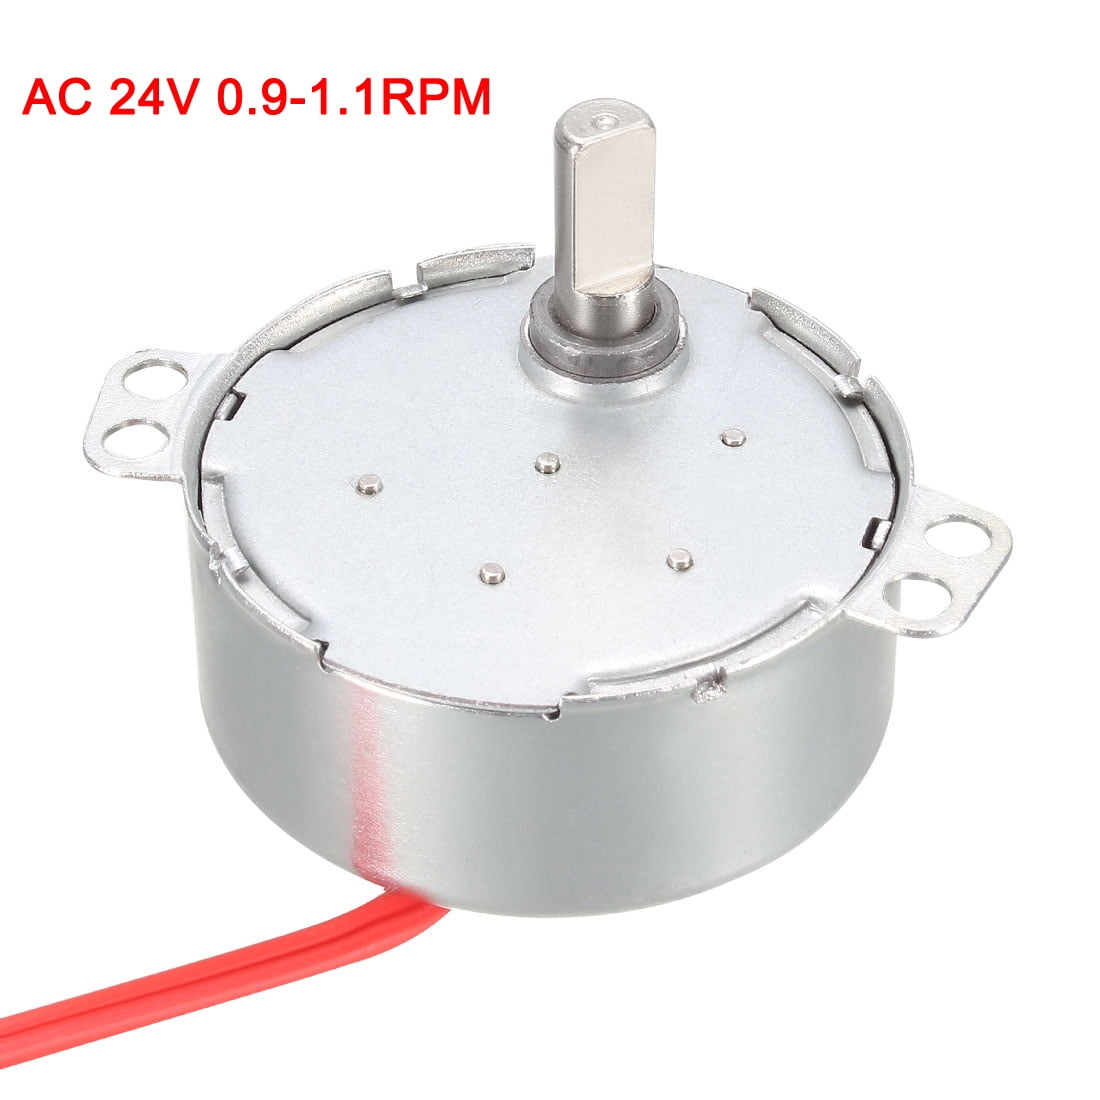 8-10 RPM Turntable Synchronous Motor For Microwave Oven AC 220-240V 4W CCW/CW 